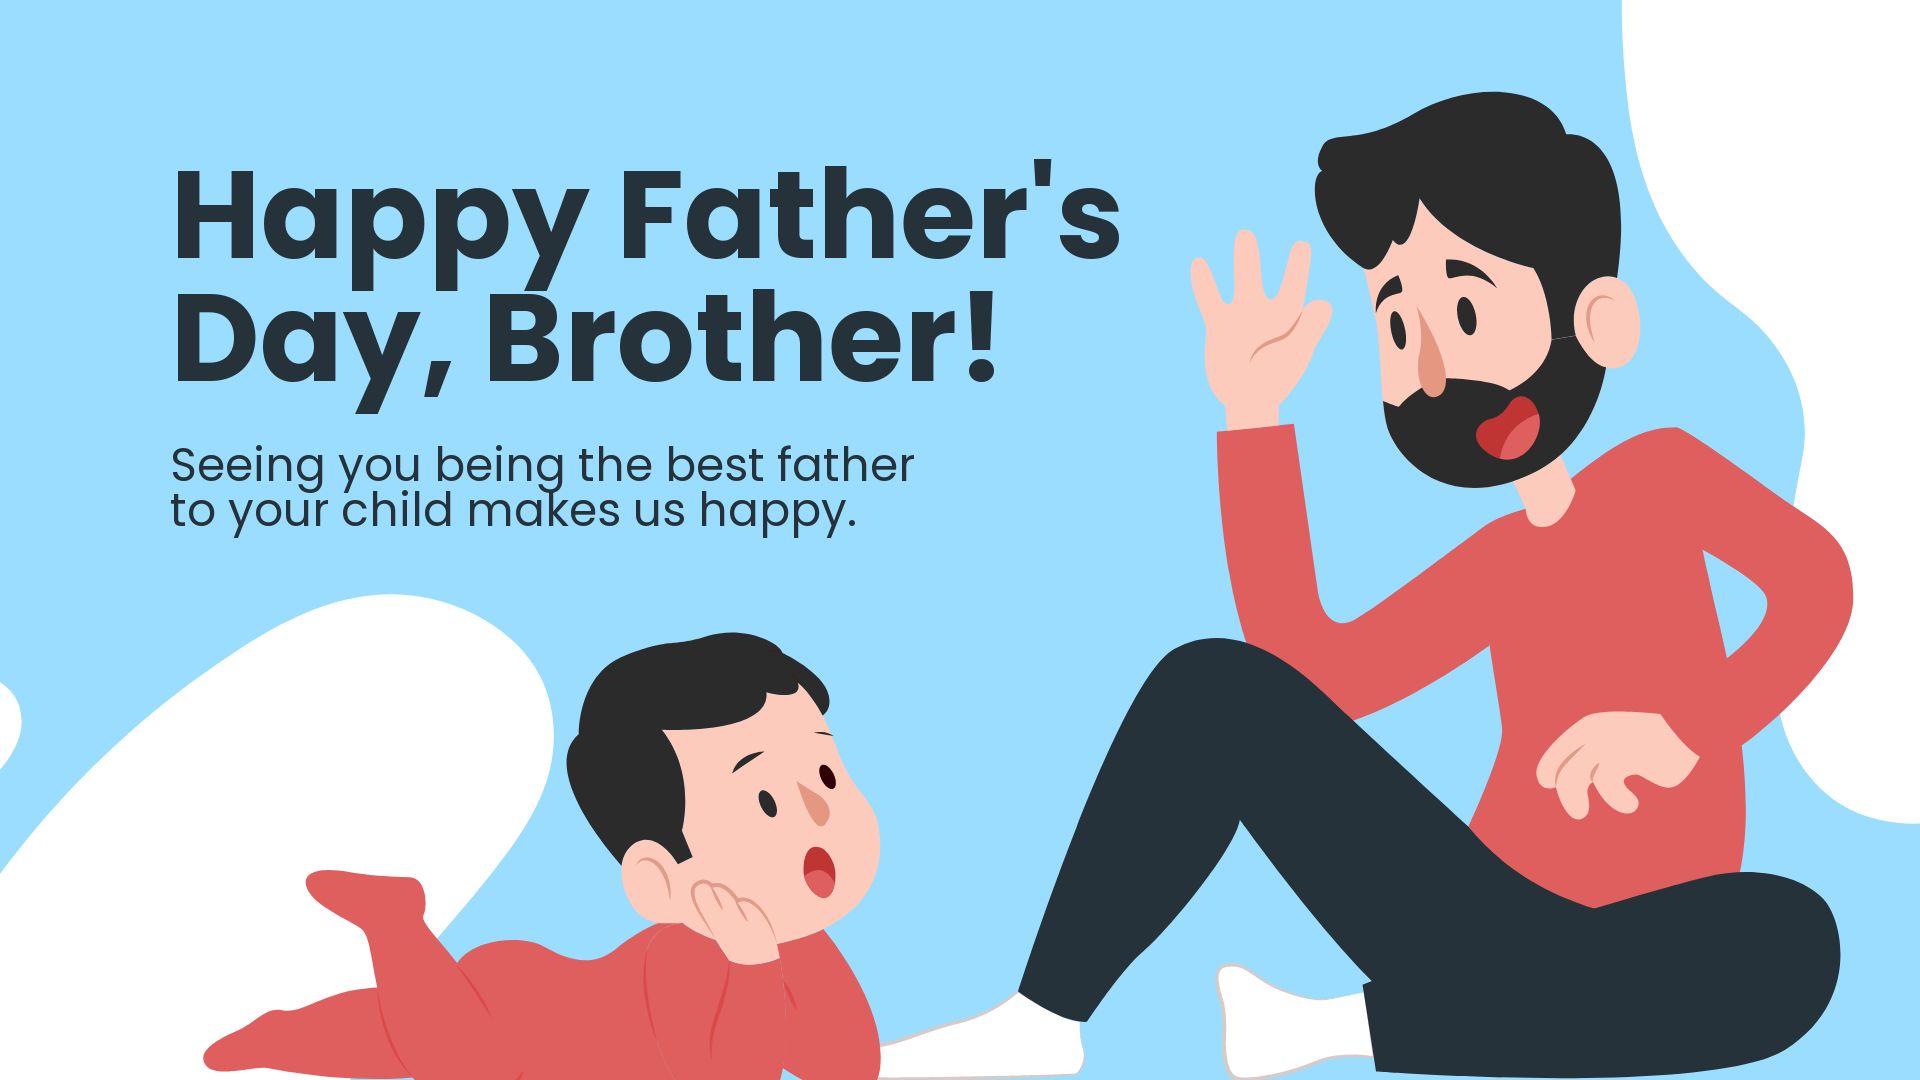 Free Happy Father's Day Brother Image